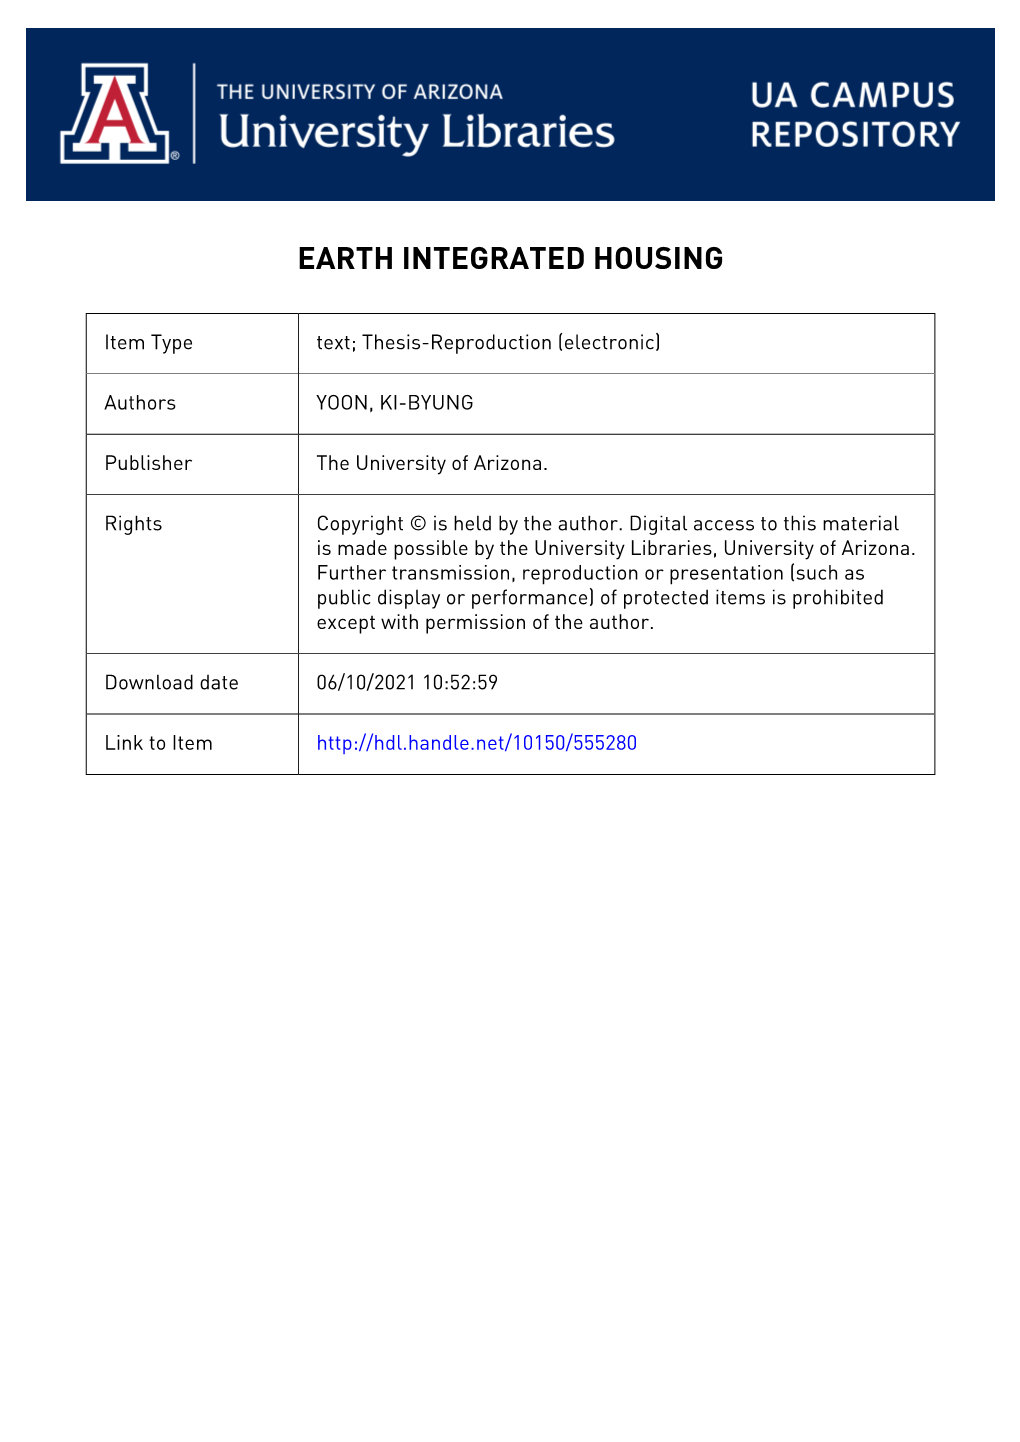 Earth-Integrated Housing